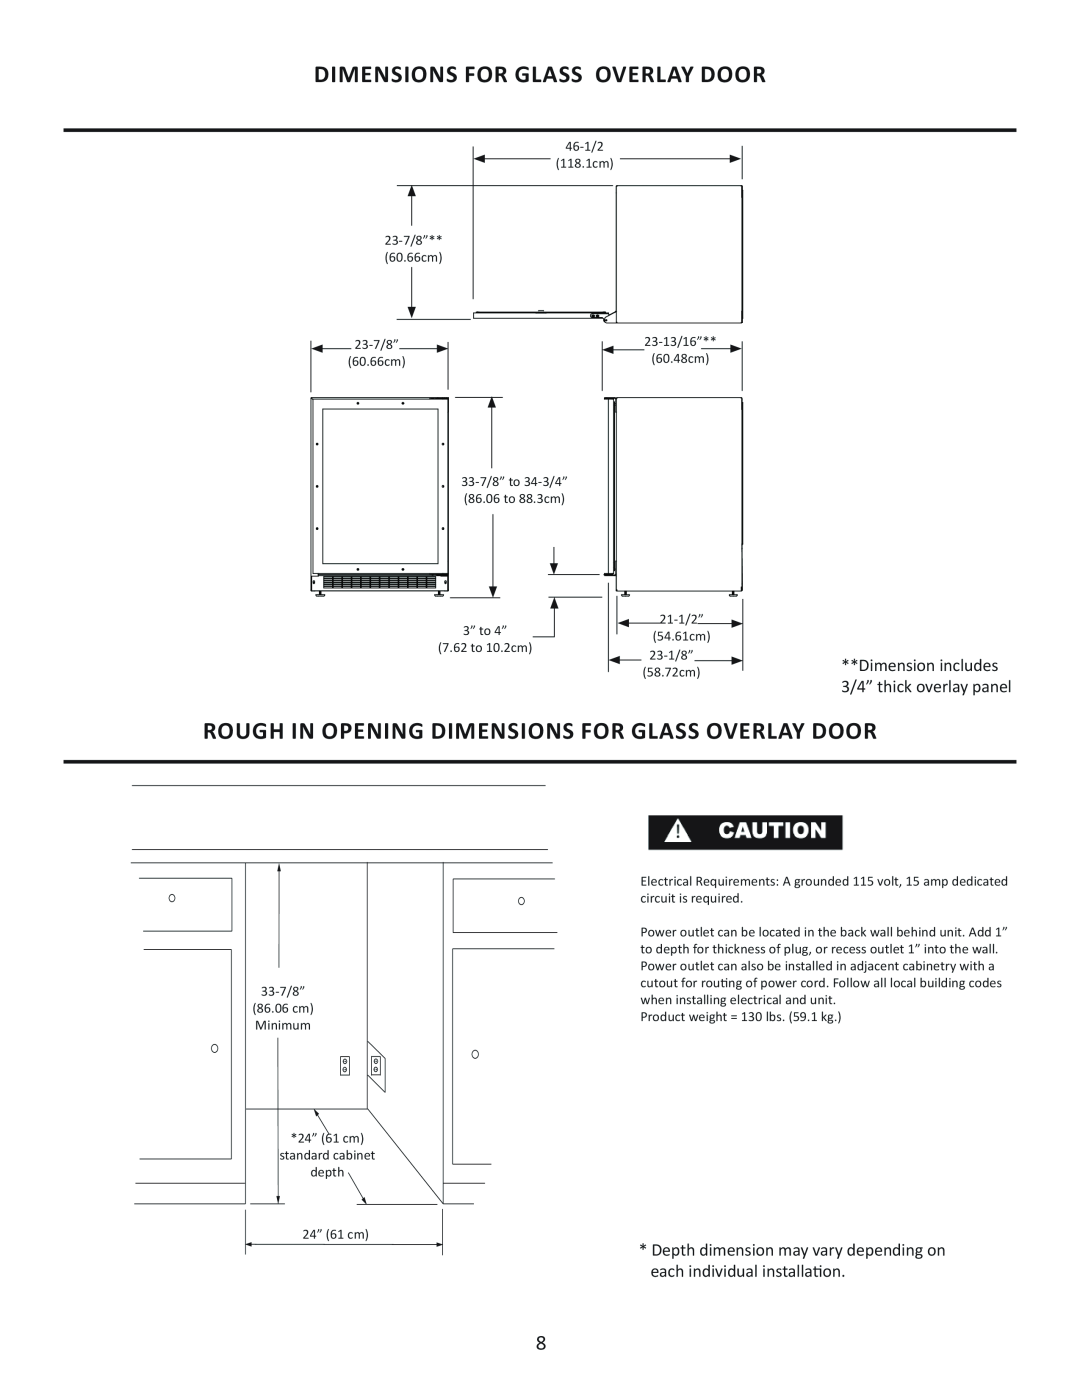 Marvel Group 6GARM Rough In Opening Dimensions For Glass Overlay Door, Dimension includes 3/4” thick overlay panel 